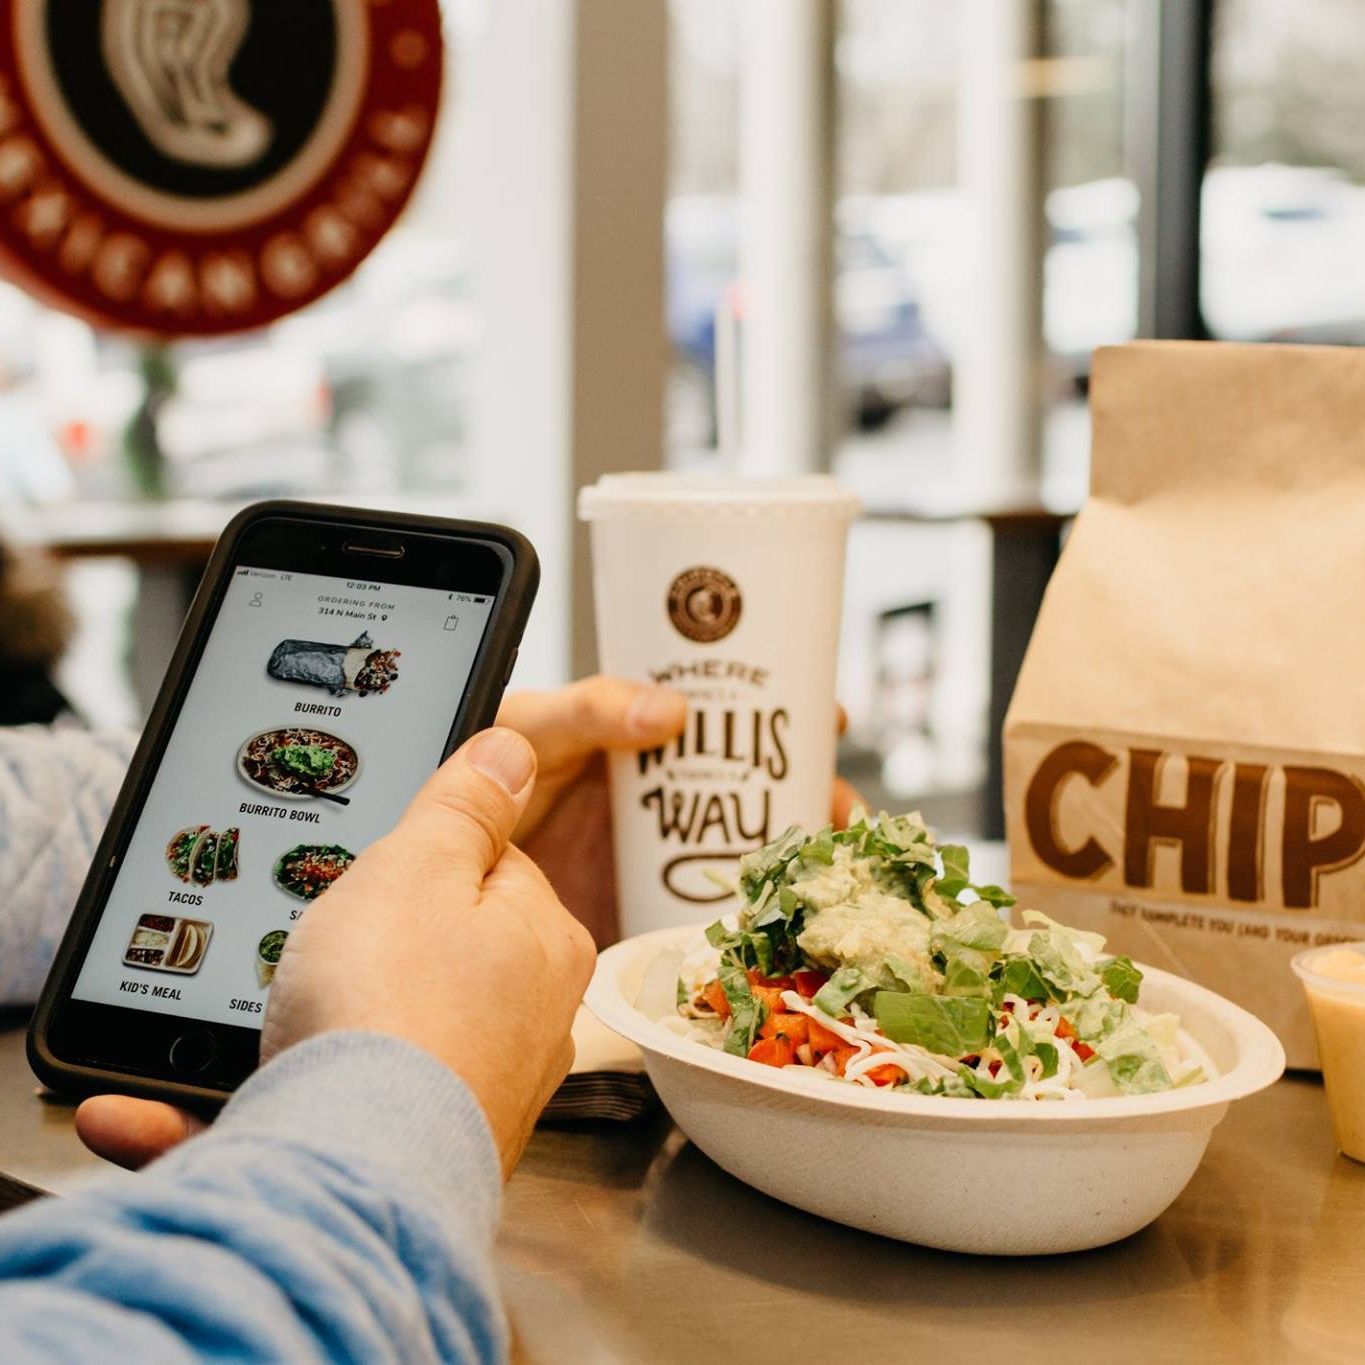 Content for Chipotle.